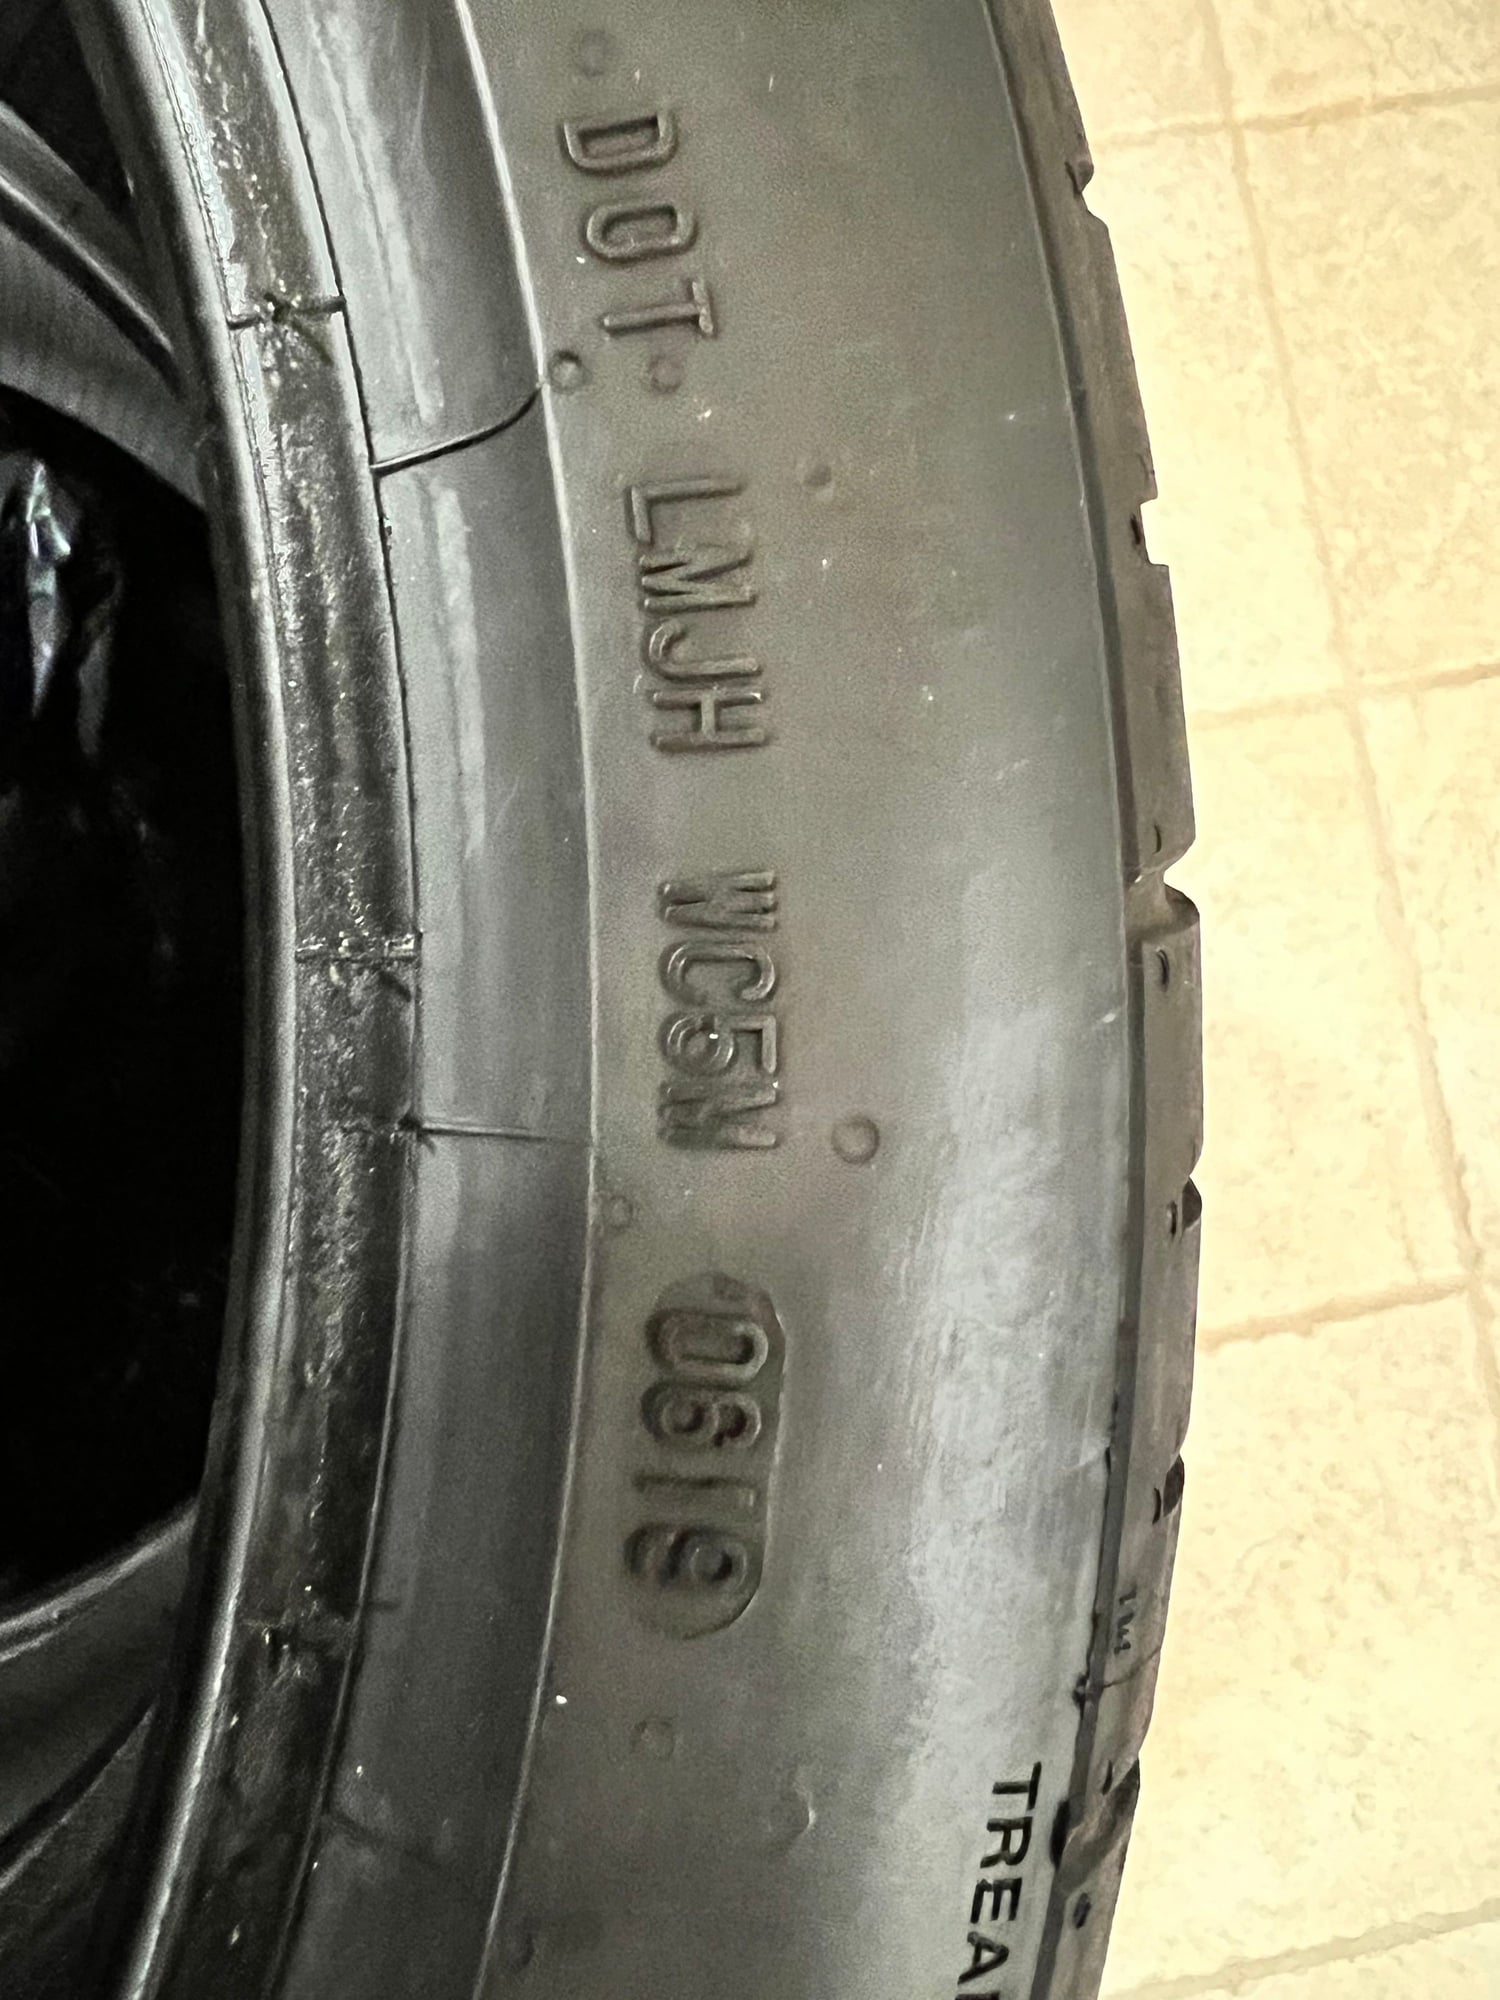 Wheels and Tires/Axles - 4 Continental sport tires - Used - 2017 to 2023 Mercedes-Benz C43 AMG - Oakdale, NY 11716, United States